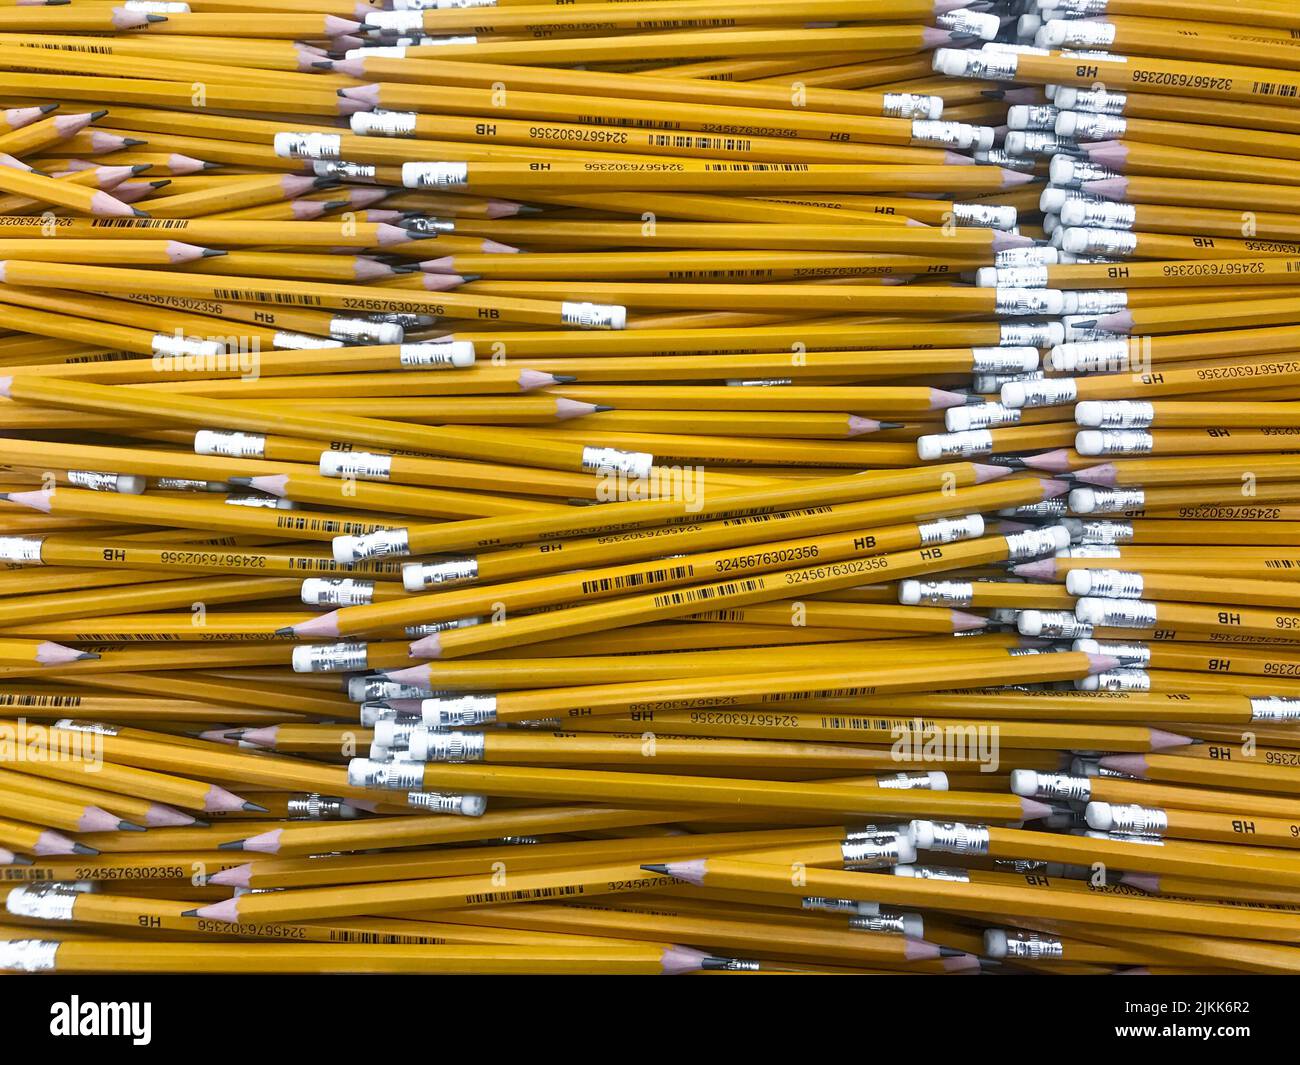 Moscow, Russia, August 2019: Close-up of many simple yellow wooden pencils with white erasers on the tips, one with a broken lead. Education concept, Stock Photo